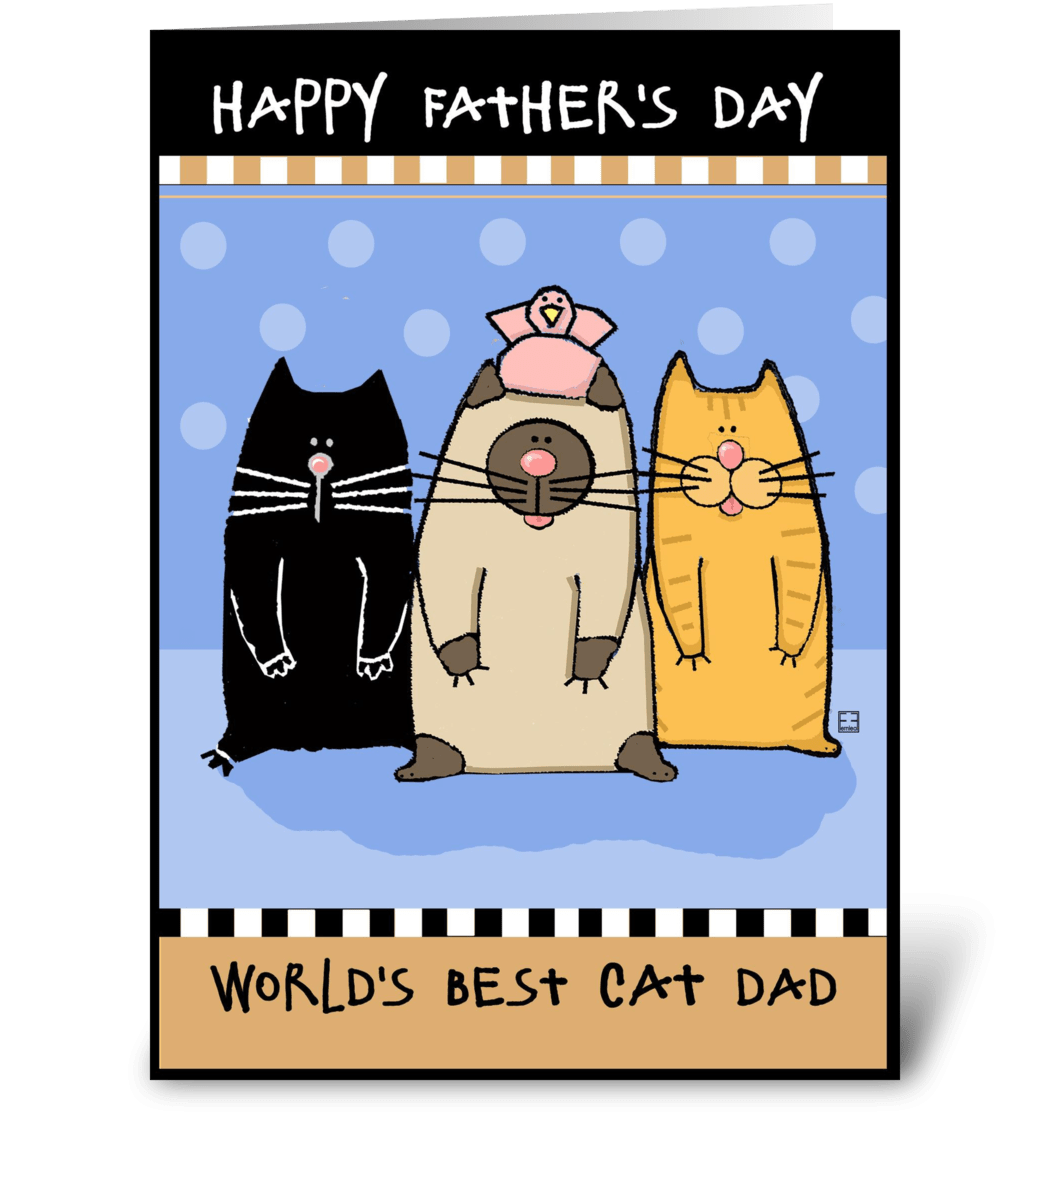 Happy Father's Day World's Best Cat Dad 